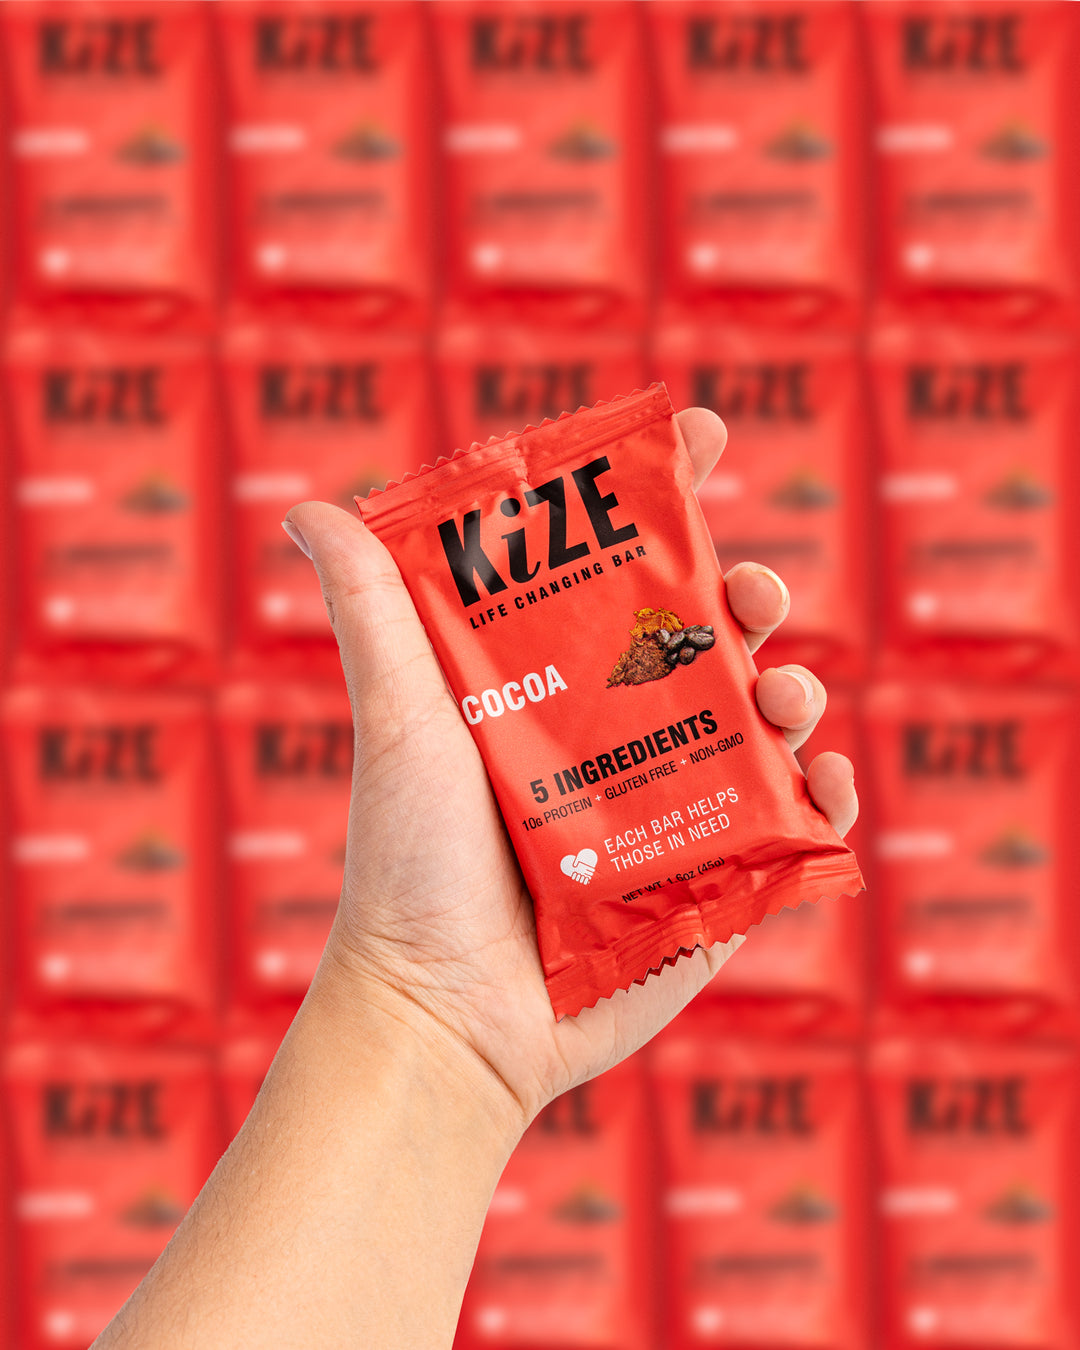 Hand holding KiZE cocoa life changing bar with blurred background of product boxes